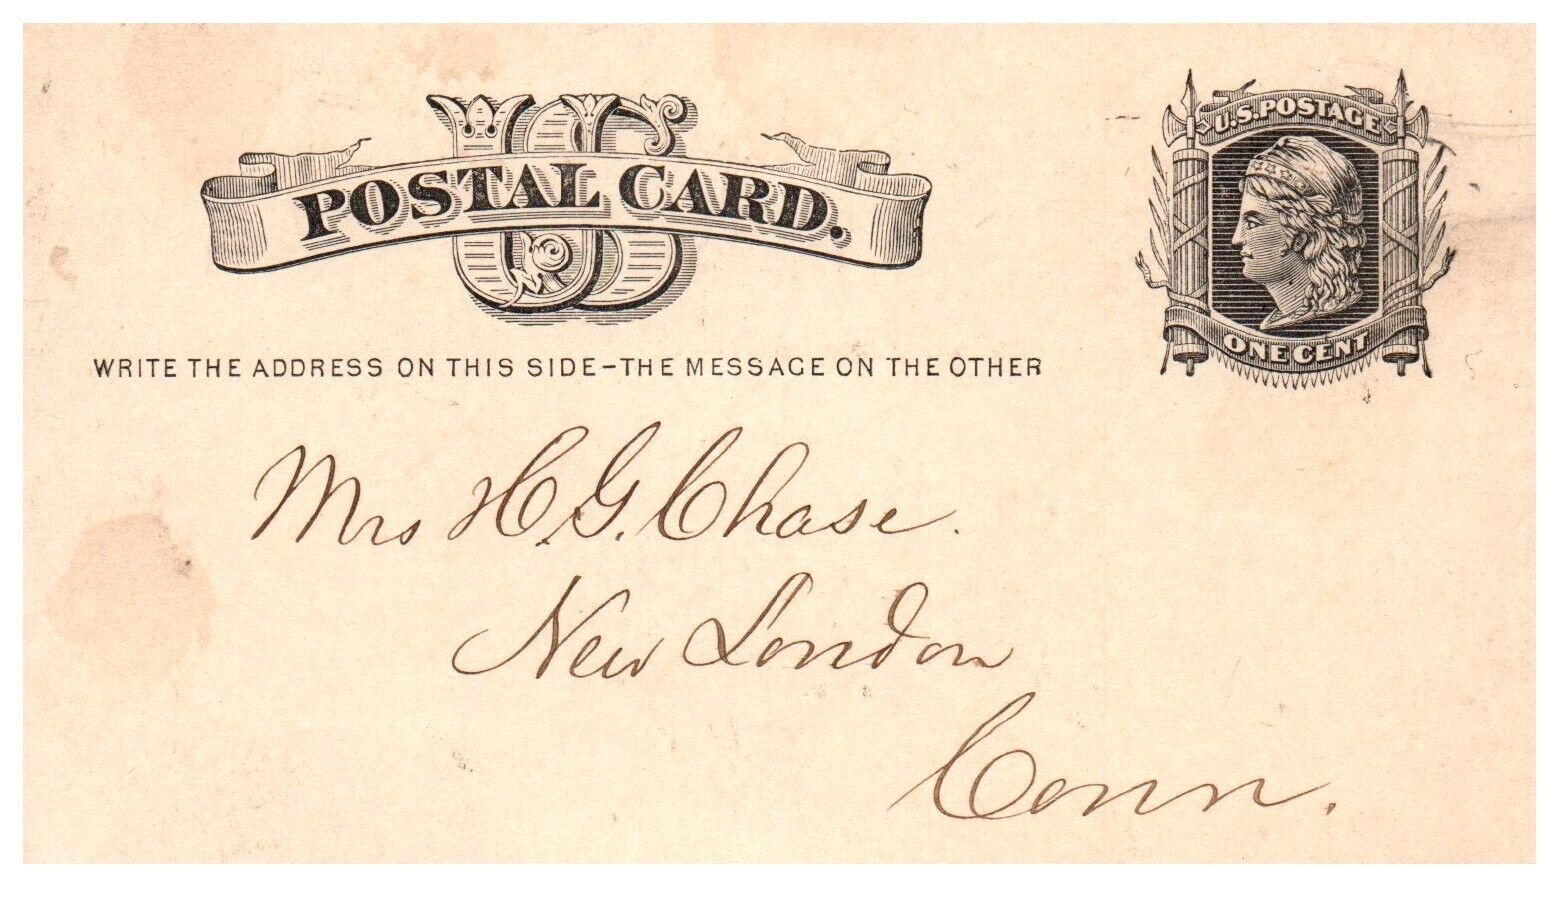 New London Connecticut CT Postal Card Oct 26 1878 Postcard H.G. Chase